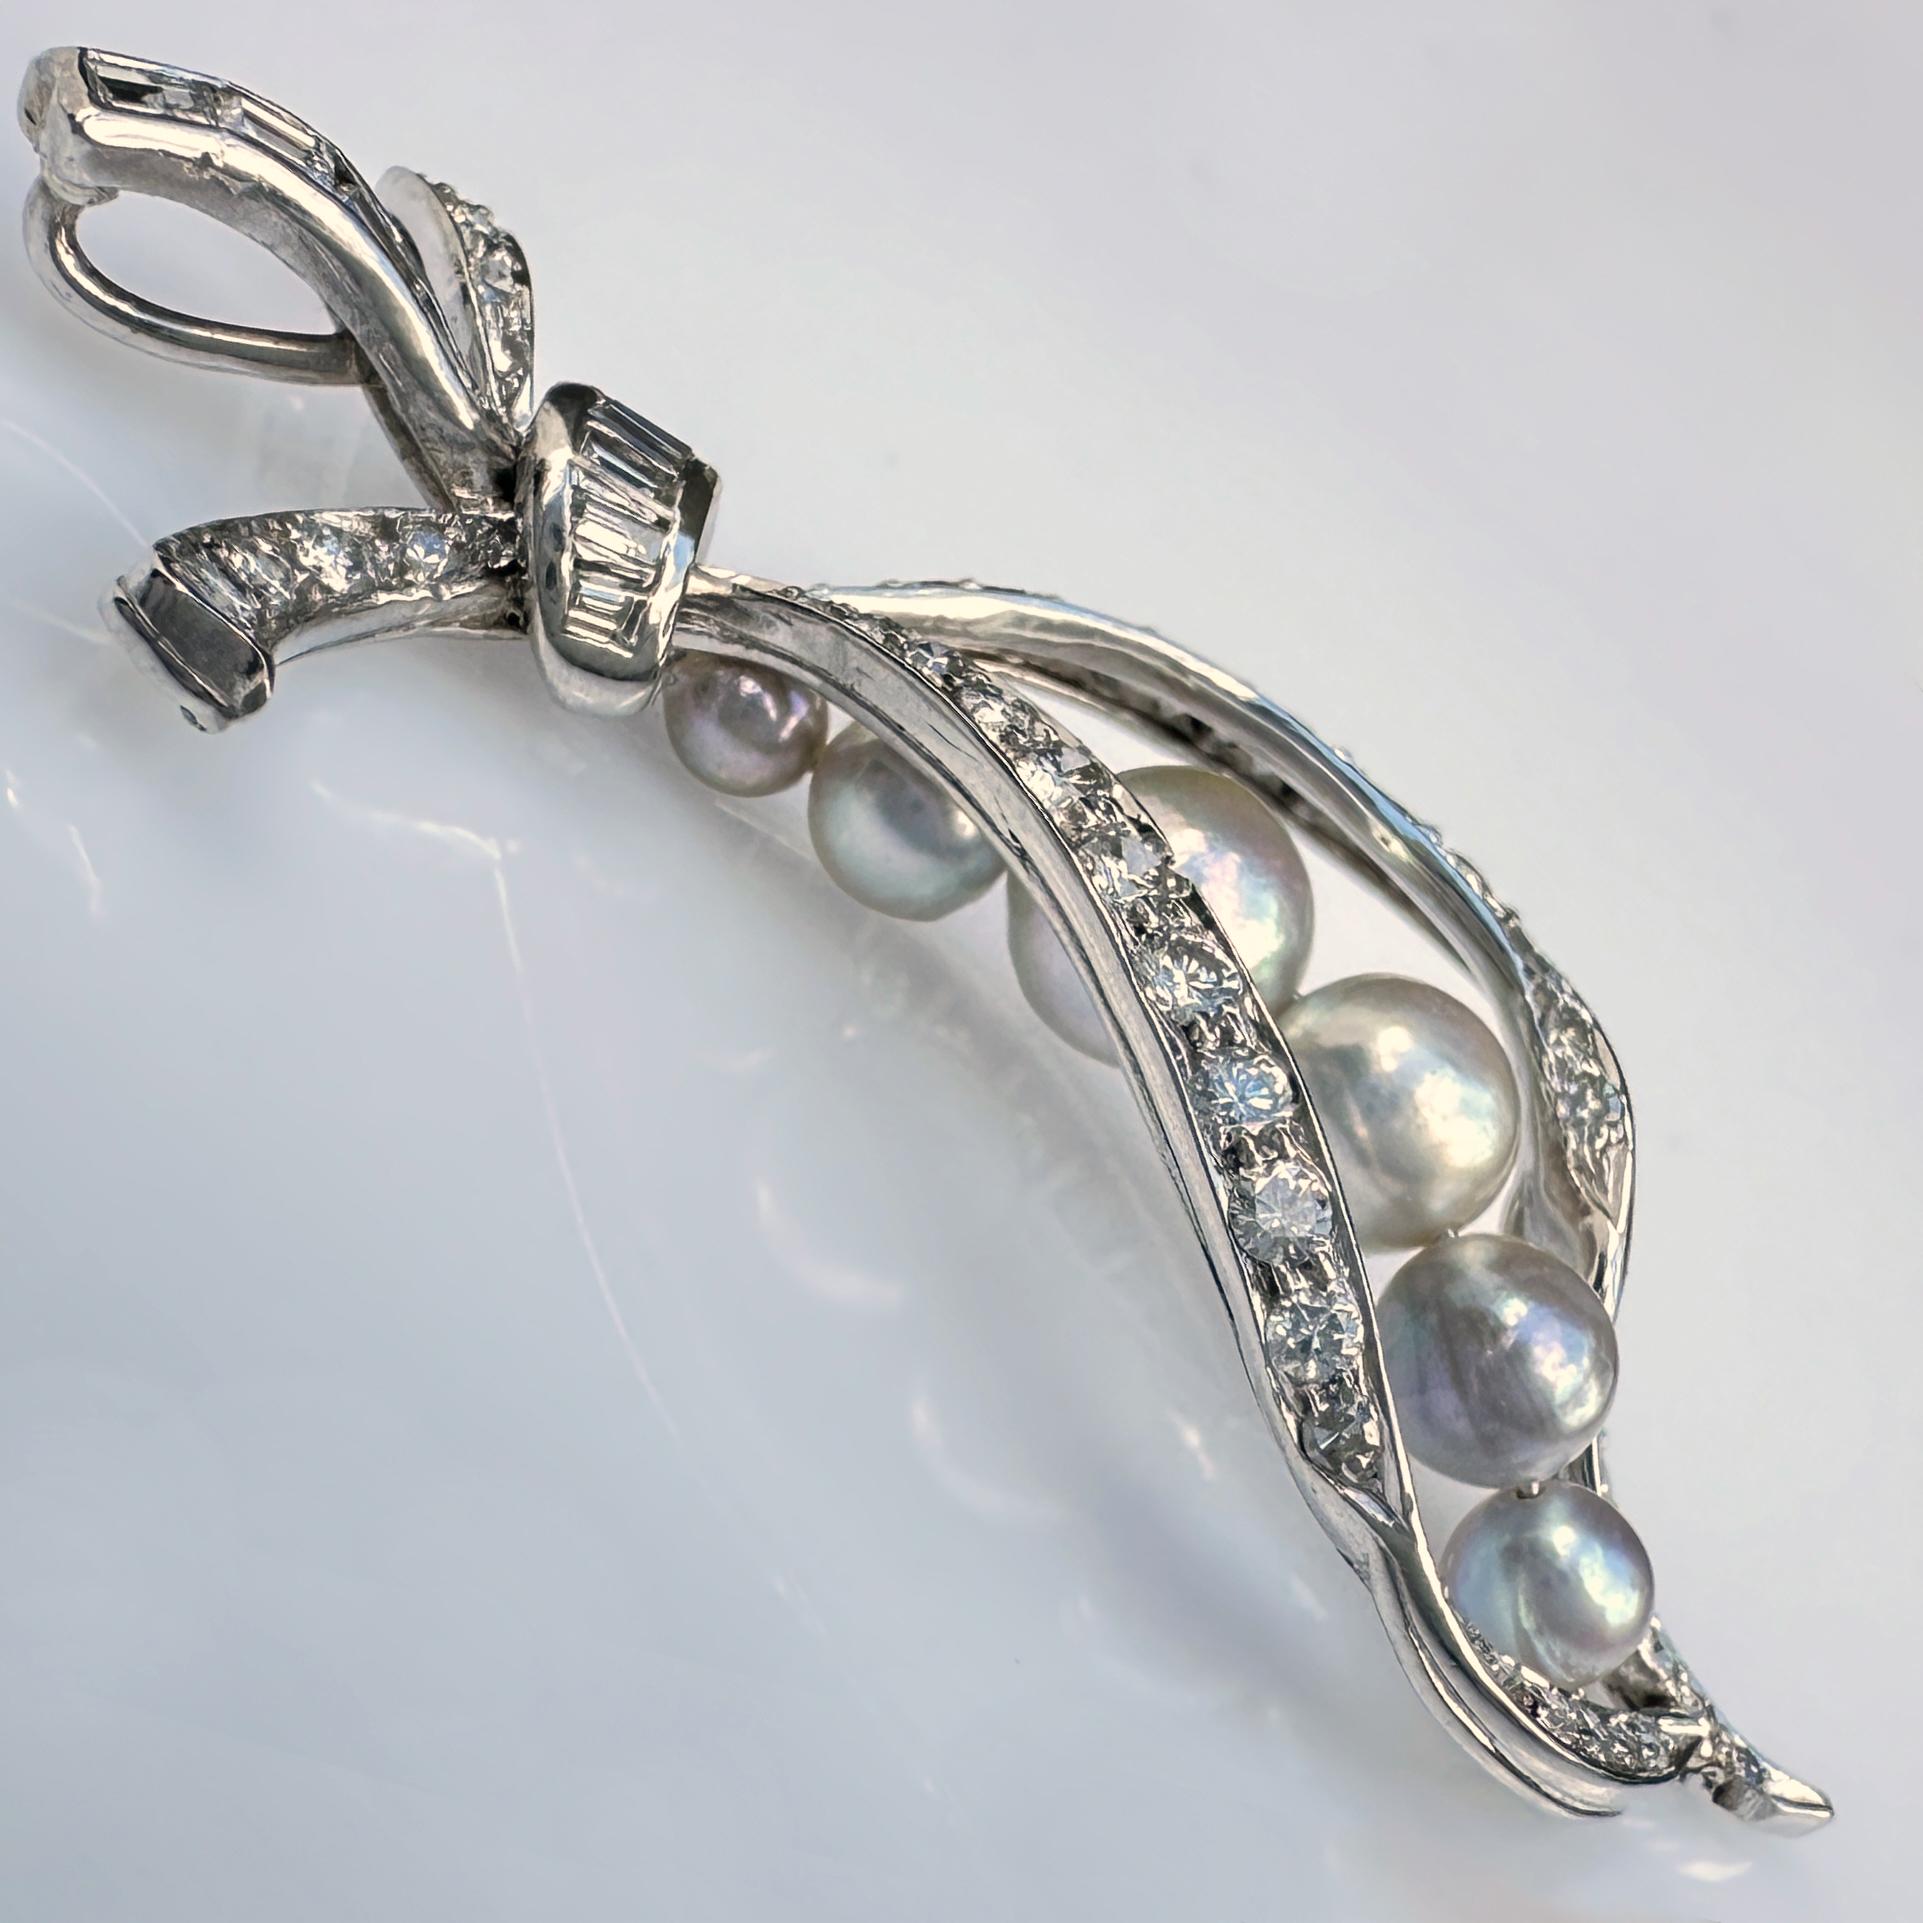 1 Carat Diamond Ribbon Pendant in Platinum with Silver-Blue Akoya Pearls For Sale 7